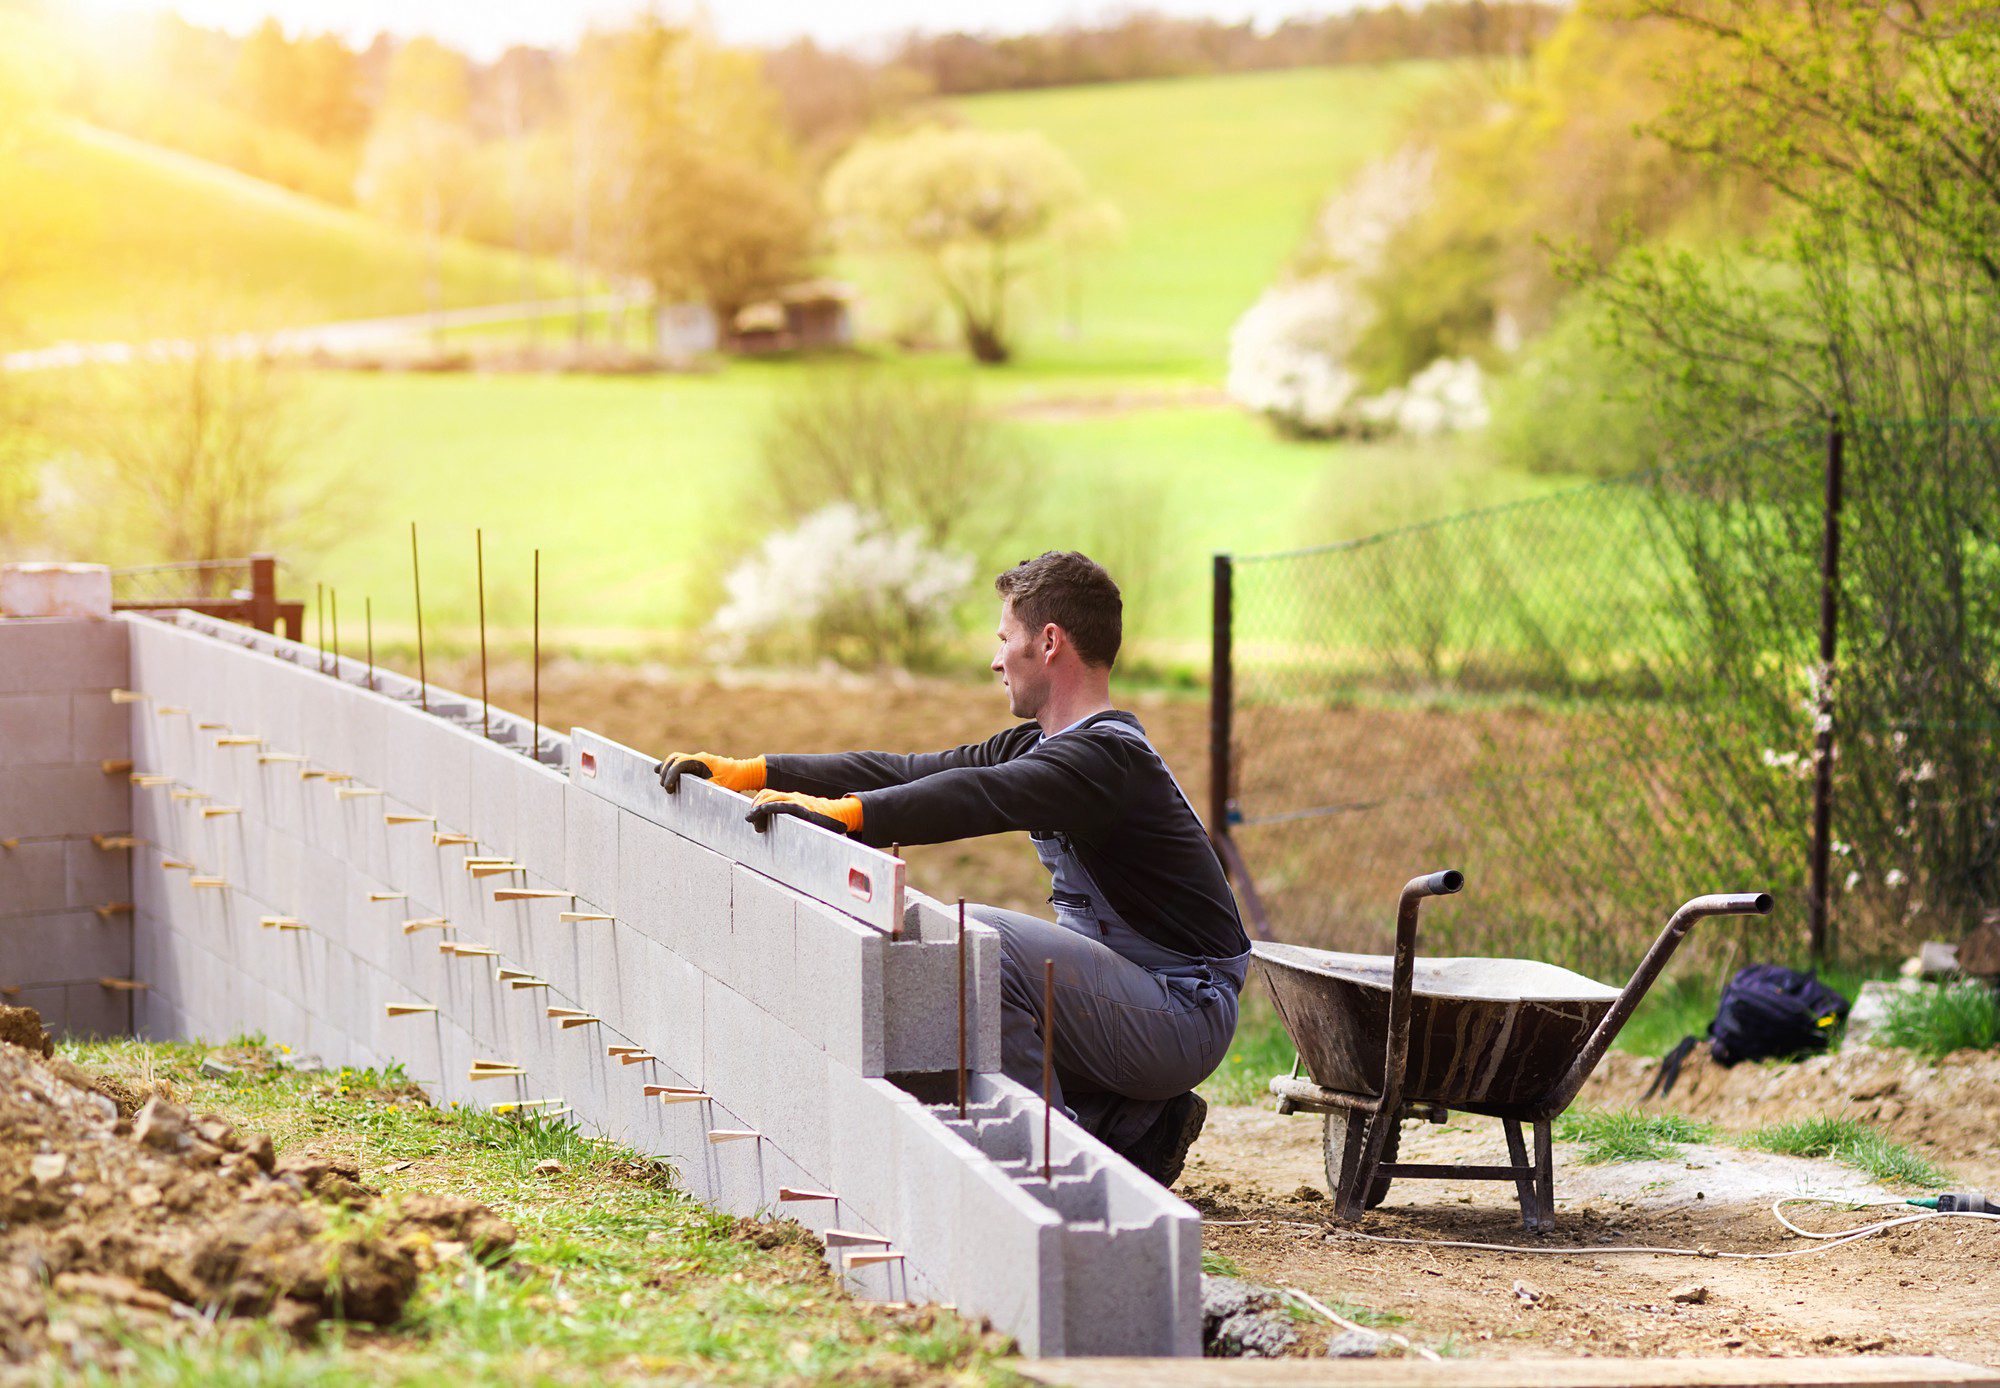 The image shows a construction setting where a person appears to be constructing a cinder block wall. The individual is wearing casual work attire with gloves, and is seated on the wall while examining or resting from the work. There's a wheelbarrow nearby, which is typically used to transport materials at a construction site. The environment around the construction area is grassy and rural with trees and fencing, suggesting the work is being done in a countryside setting. The weather seems to be fair, with sunlight illuminating the scene.